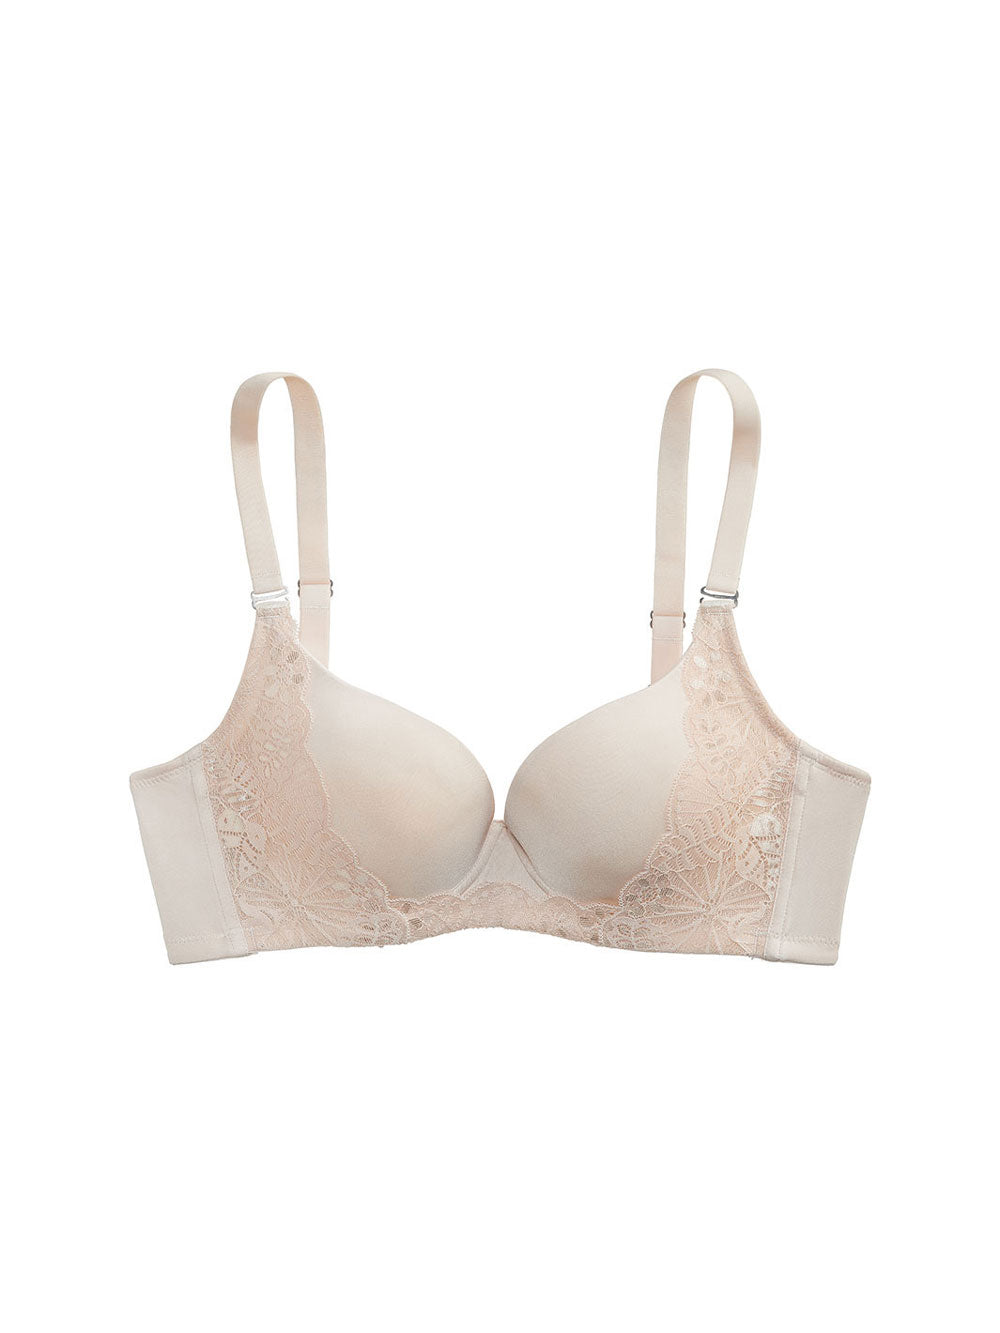 The Little Bra Company Vanessa Petite Plunge Wirefree Bra in Wisteria FINAL  SALE NORMALLY $66 - Busted Bra Shop